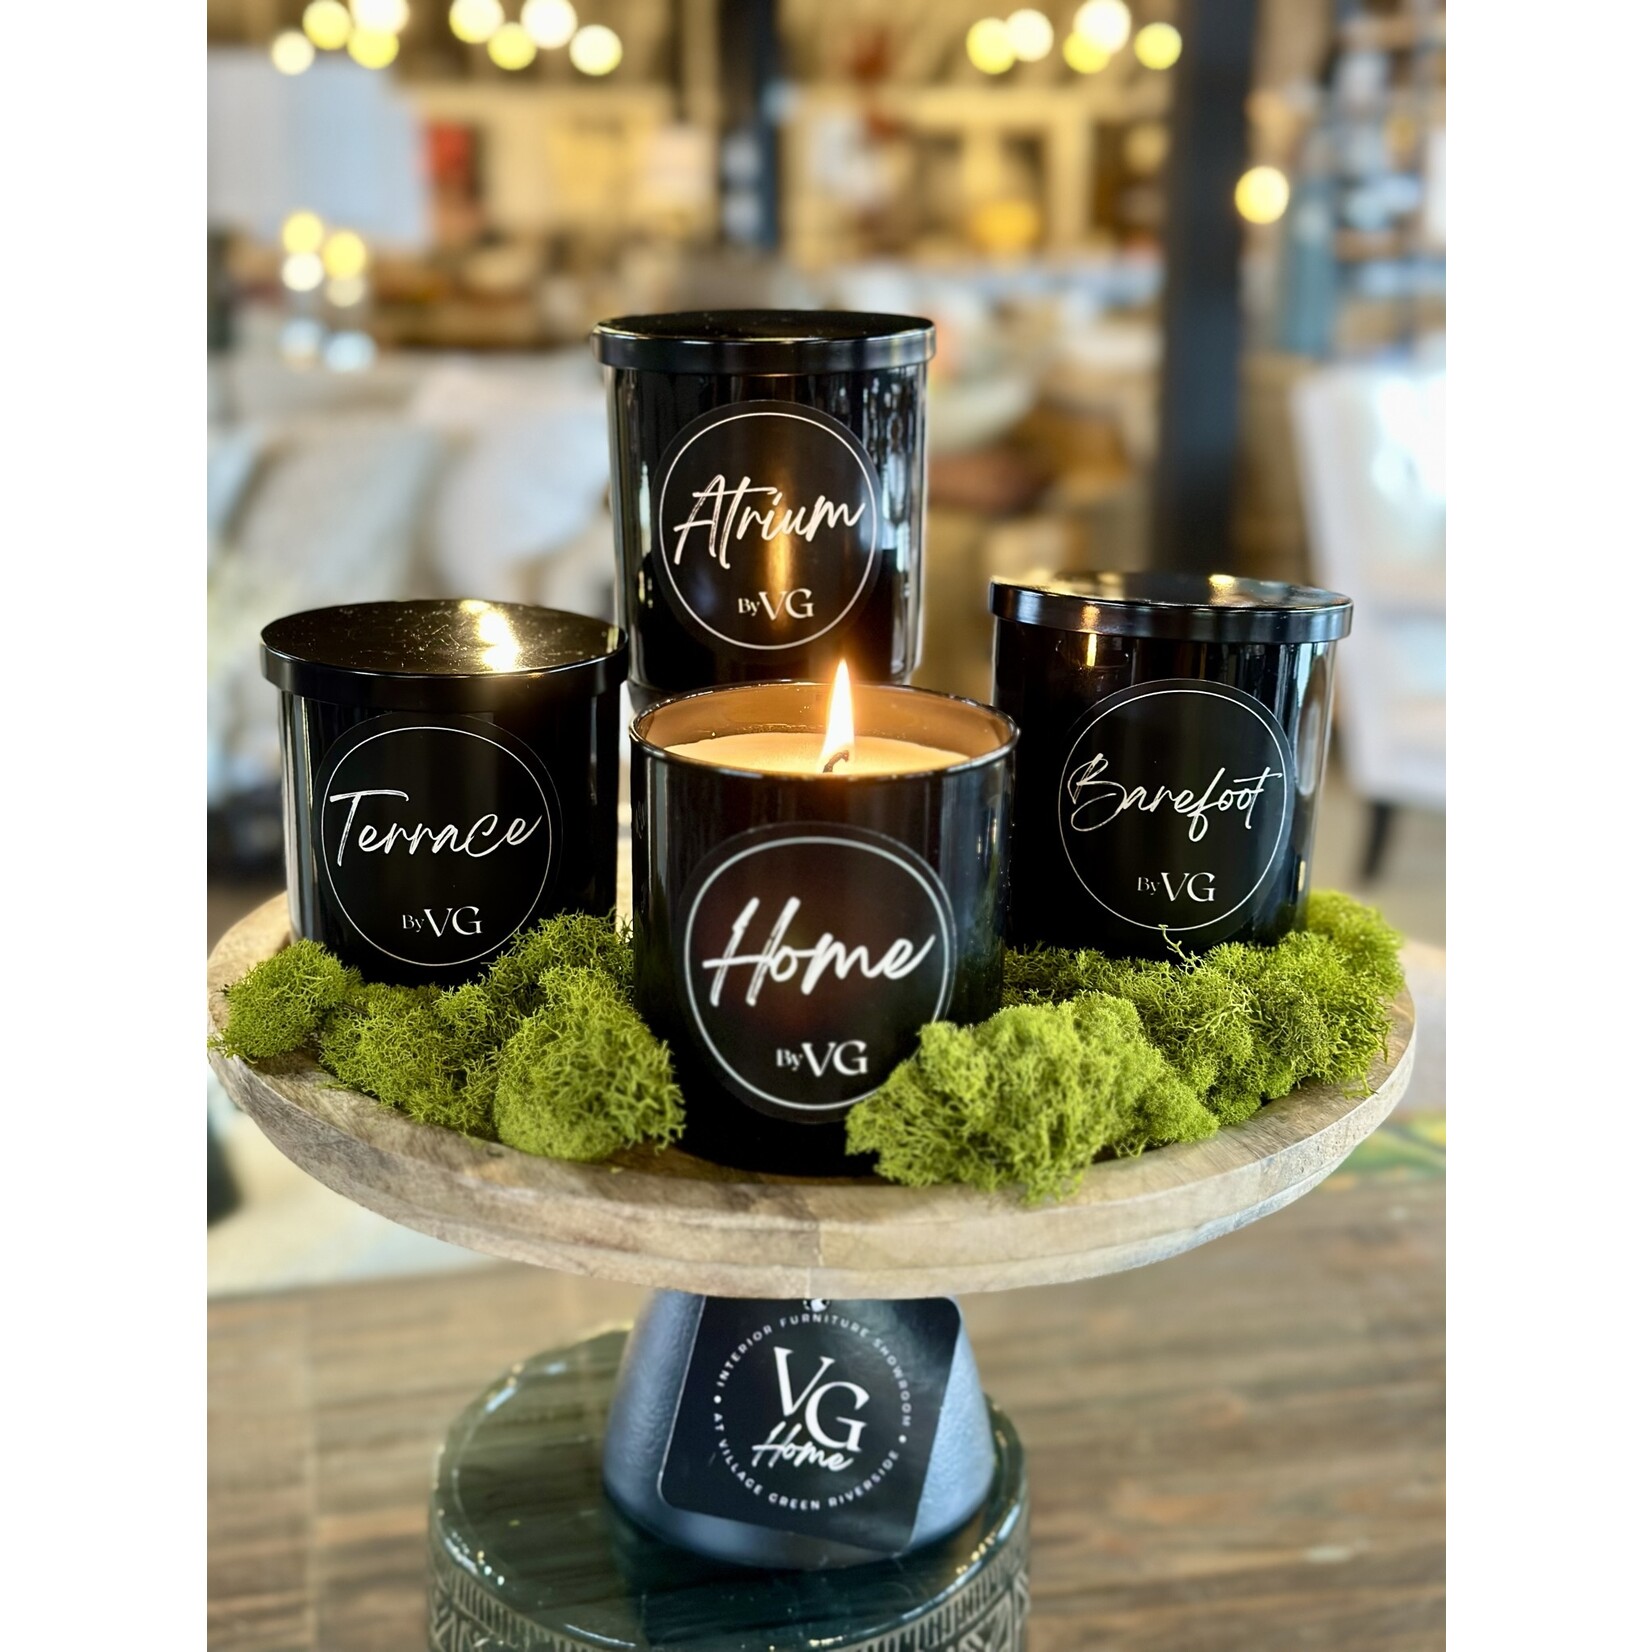 CANDLE CREST "TERRACE" By VG Signature Candle